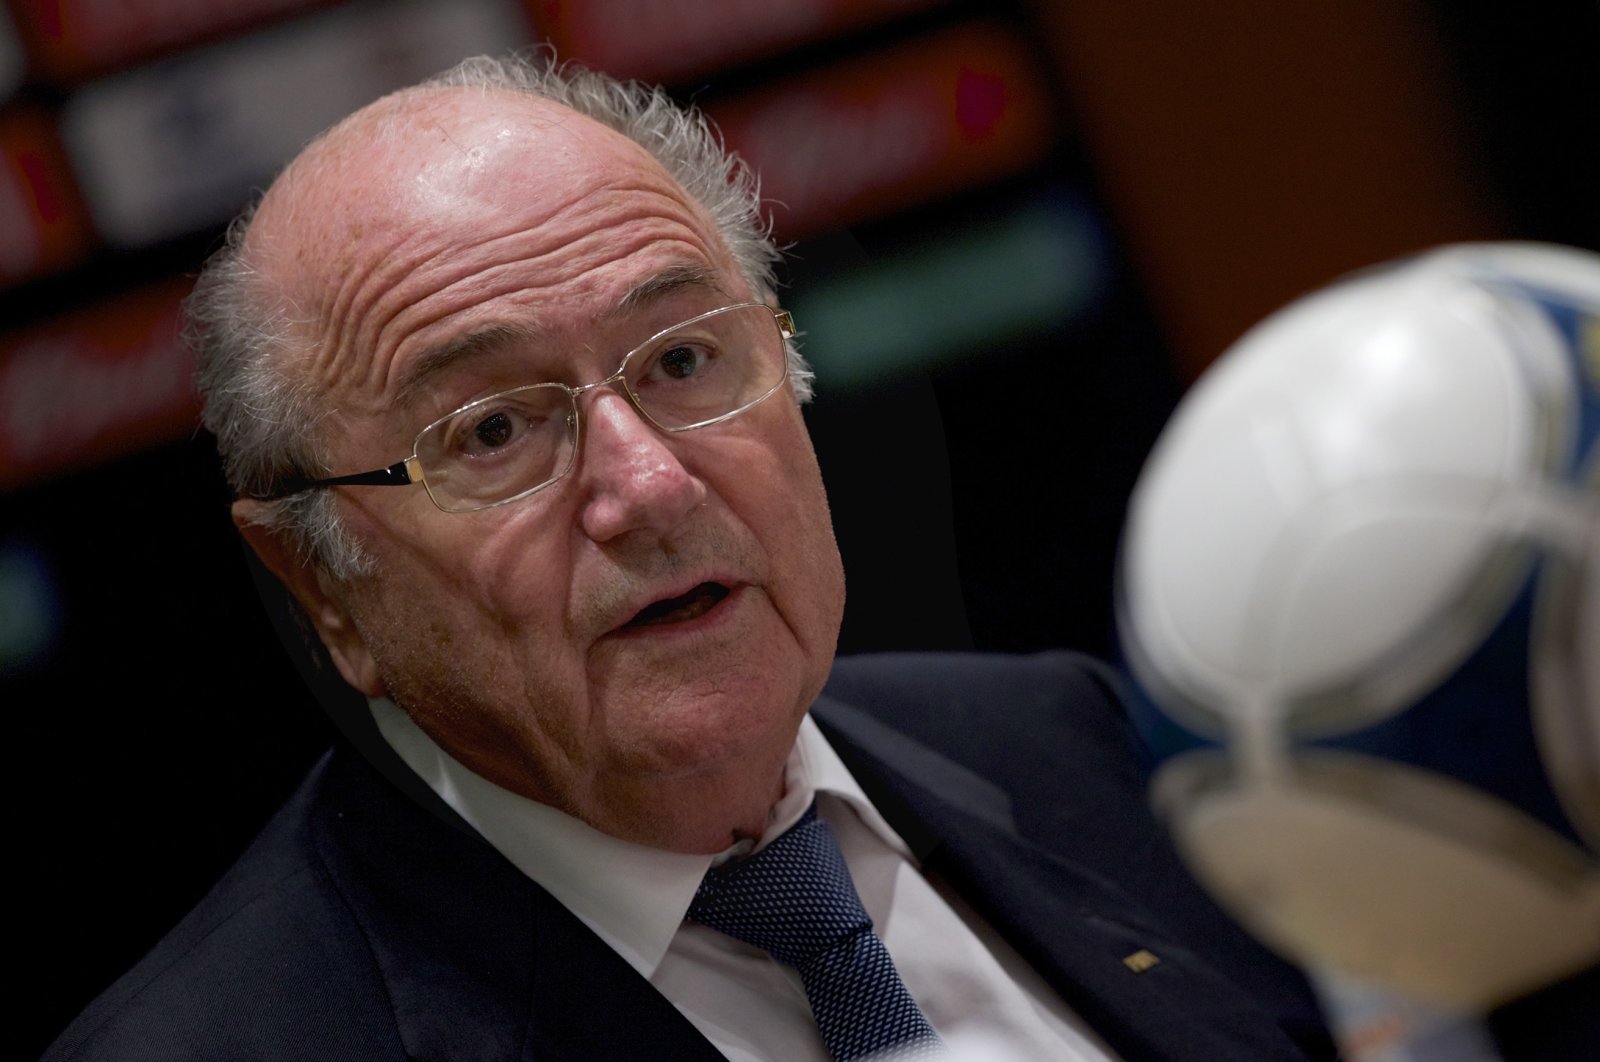 Former FIFA president Sepp Blatter speaks during a conference in Moscow, Russia, Sept. 30, 2012. (AP Photo)